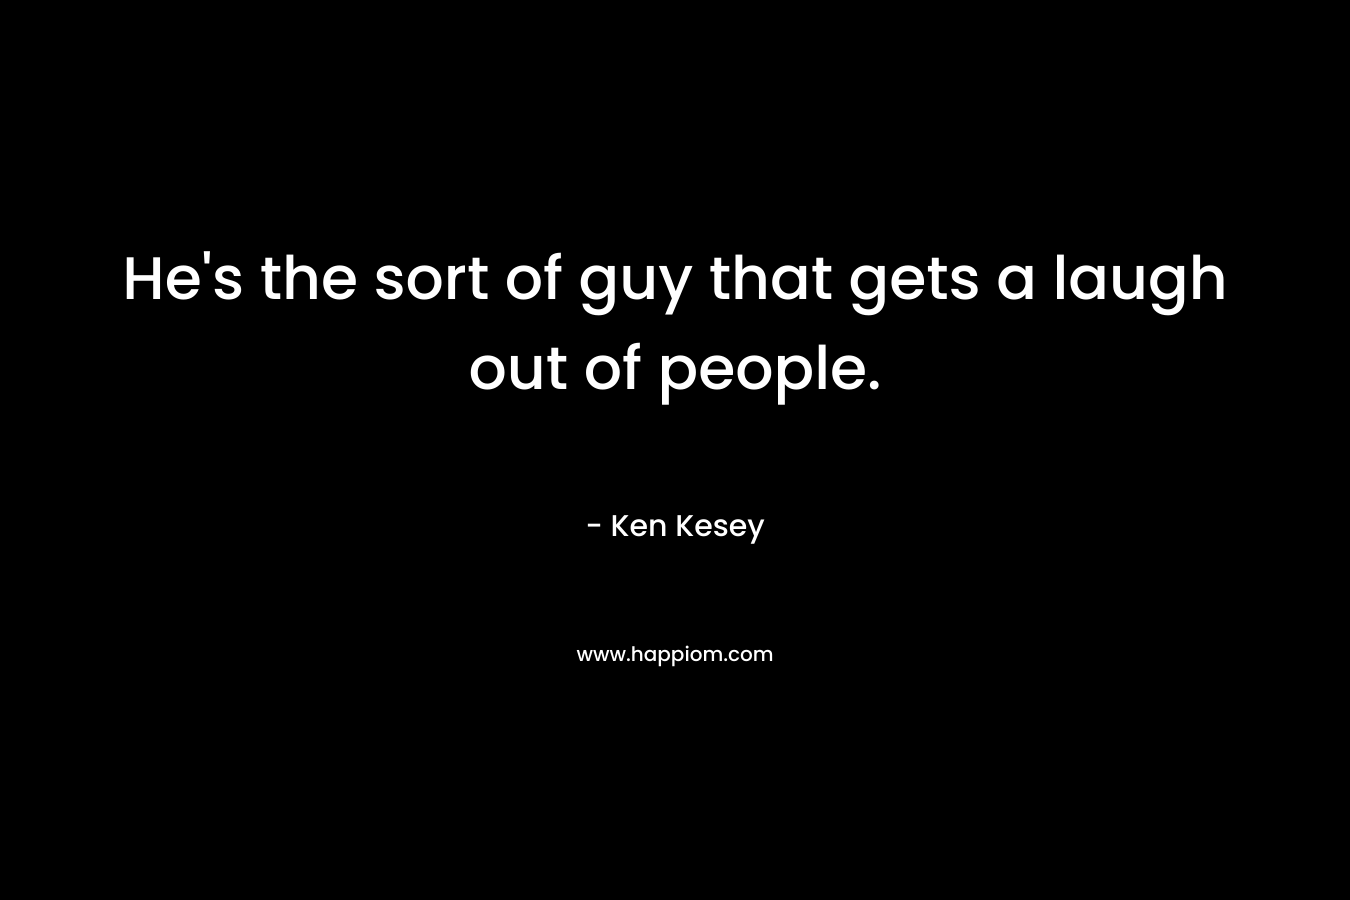 He’s the sort of guy that gets a laugh out of people. – Ken Kesey